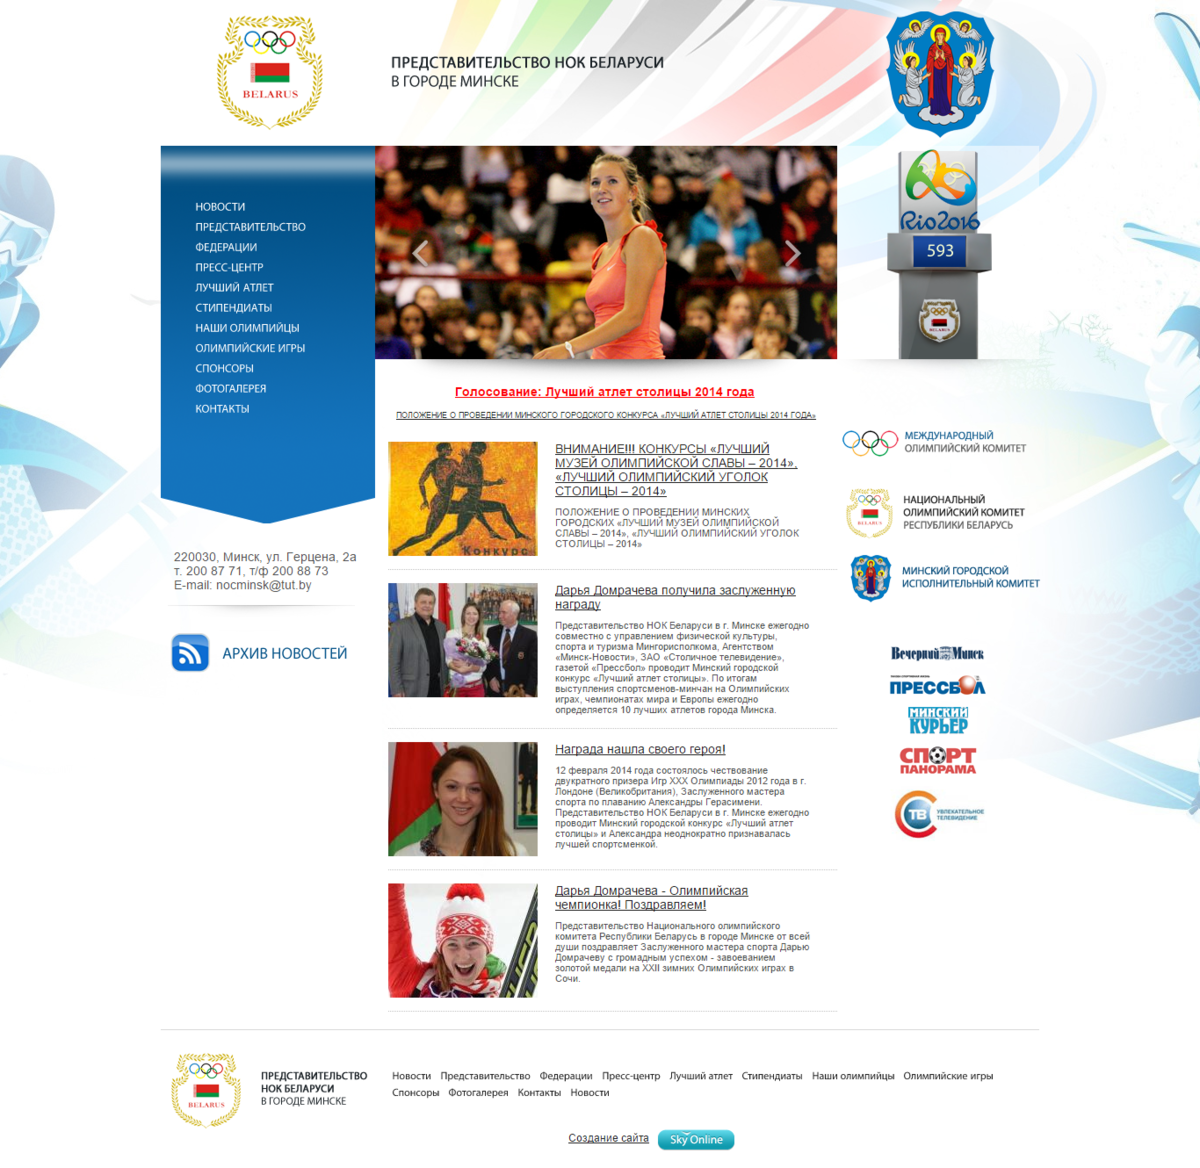 Representative office of the National Olympic Committee of Belarus in the city of Minsk